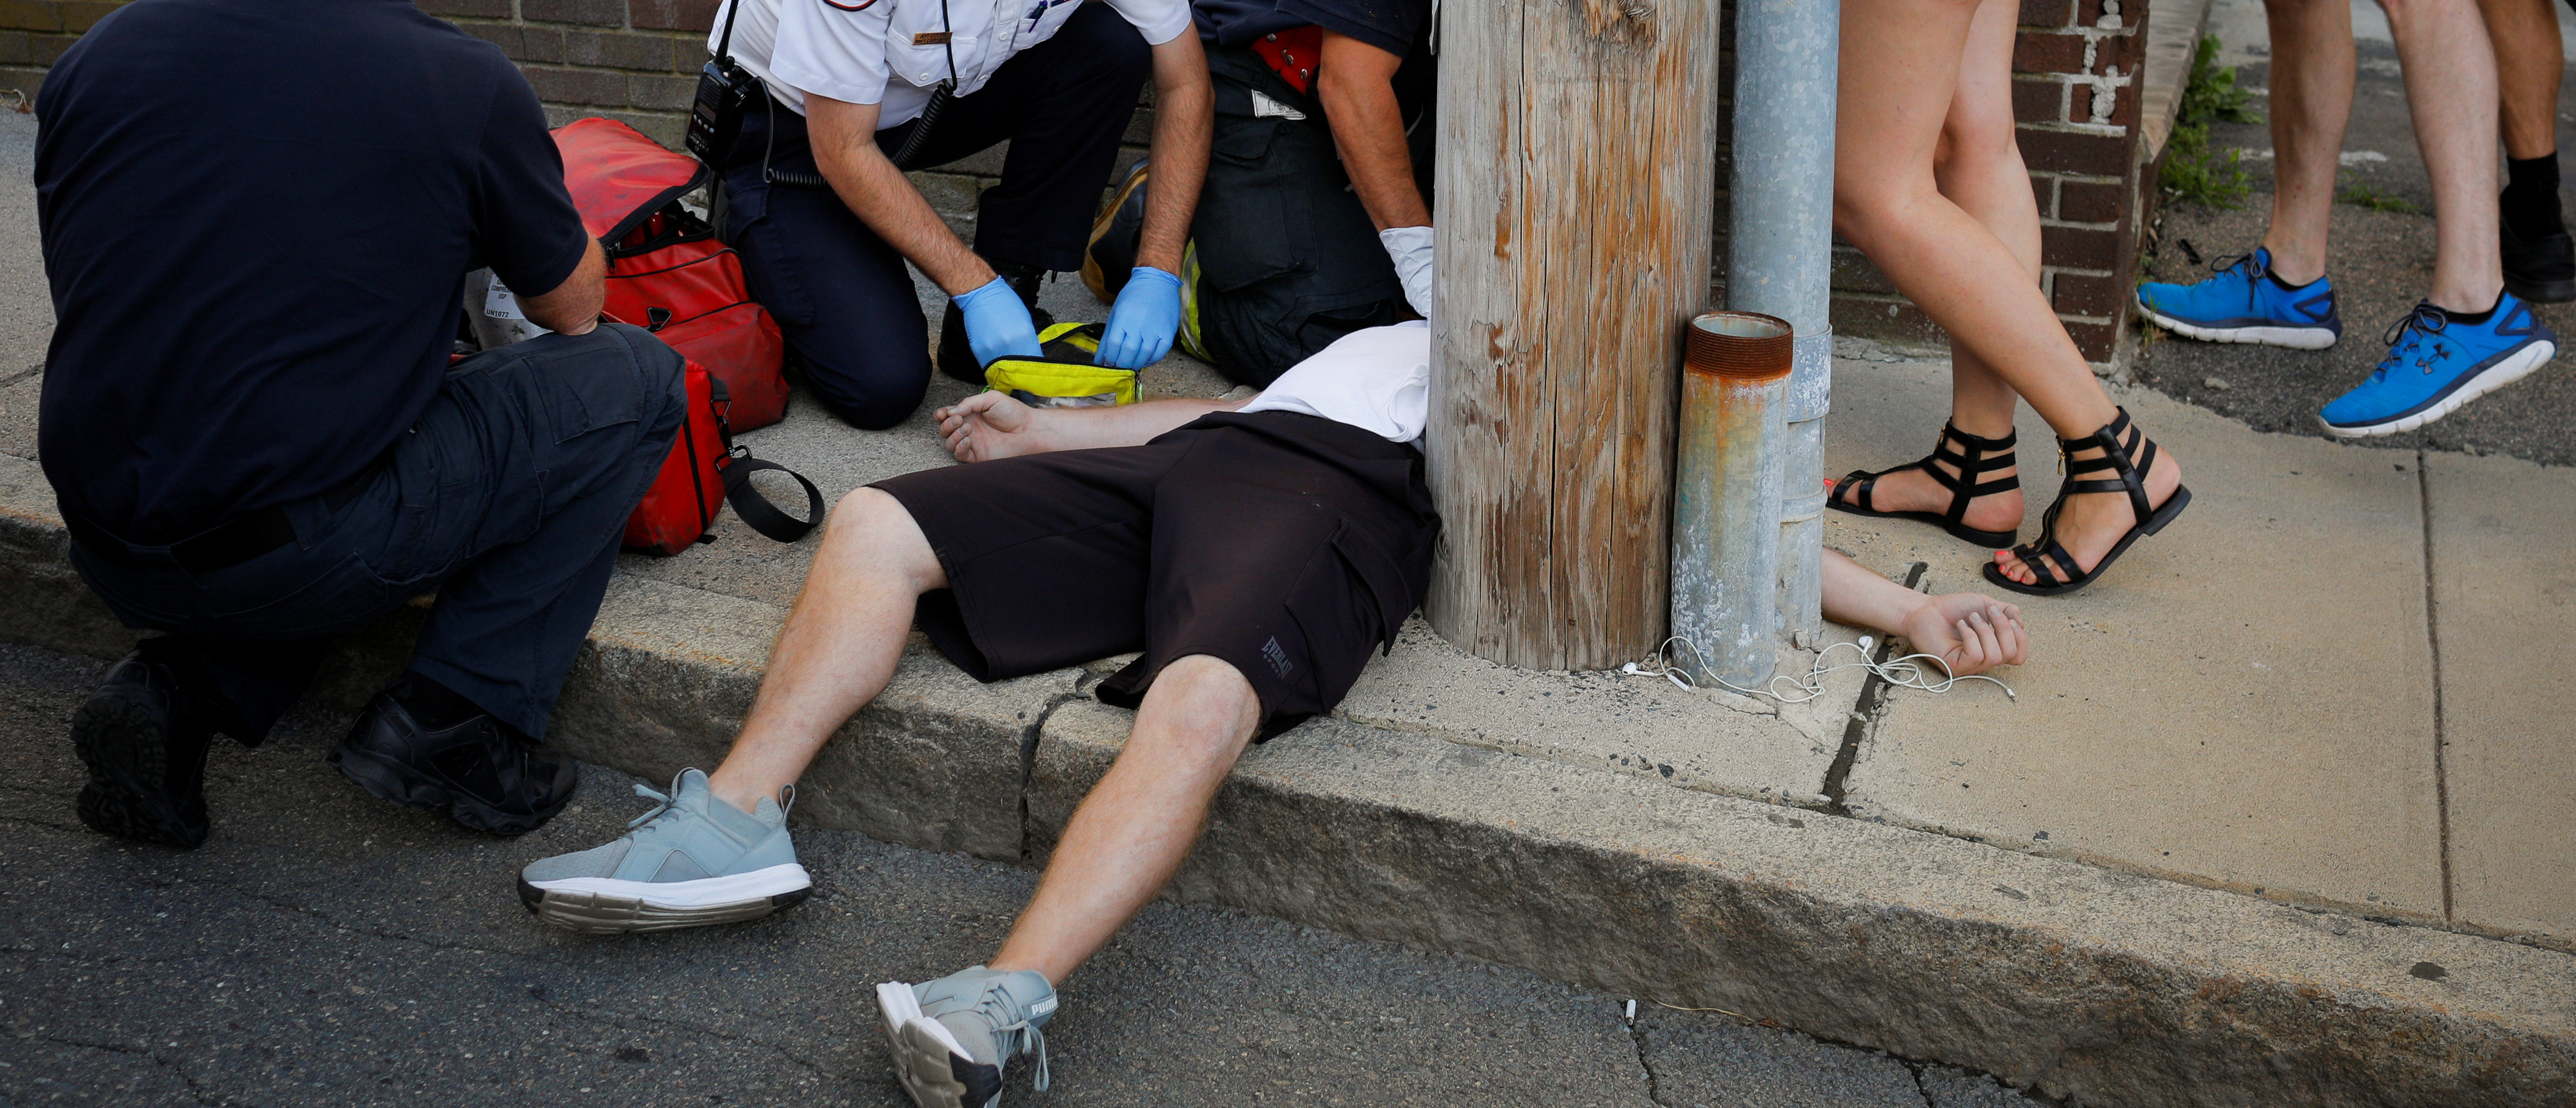 Cataldo Ambulance medics and other first responders revive a 32-year-old man who was found unresponsive and not breathing after an opioid overdose on a sidewalk in the Boston suburb of Everett, Massachusetts, U.S., August 23, 2017. REUTERS/Brian Snyder